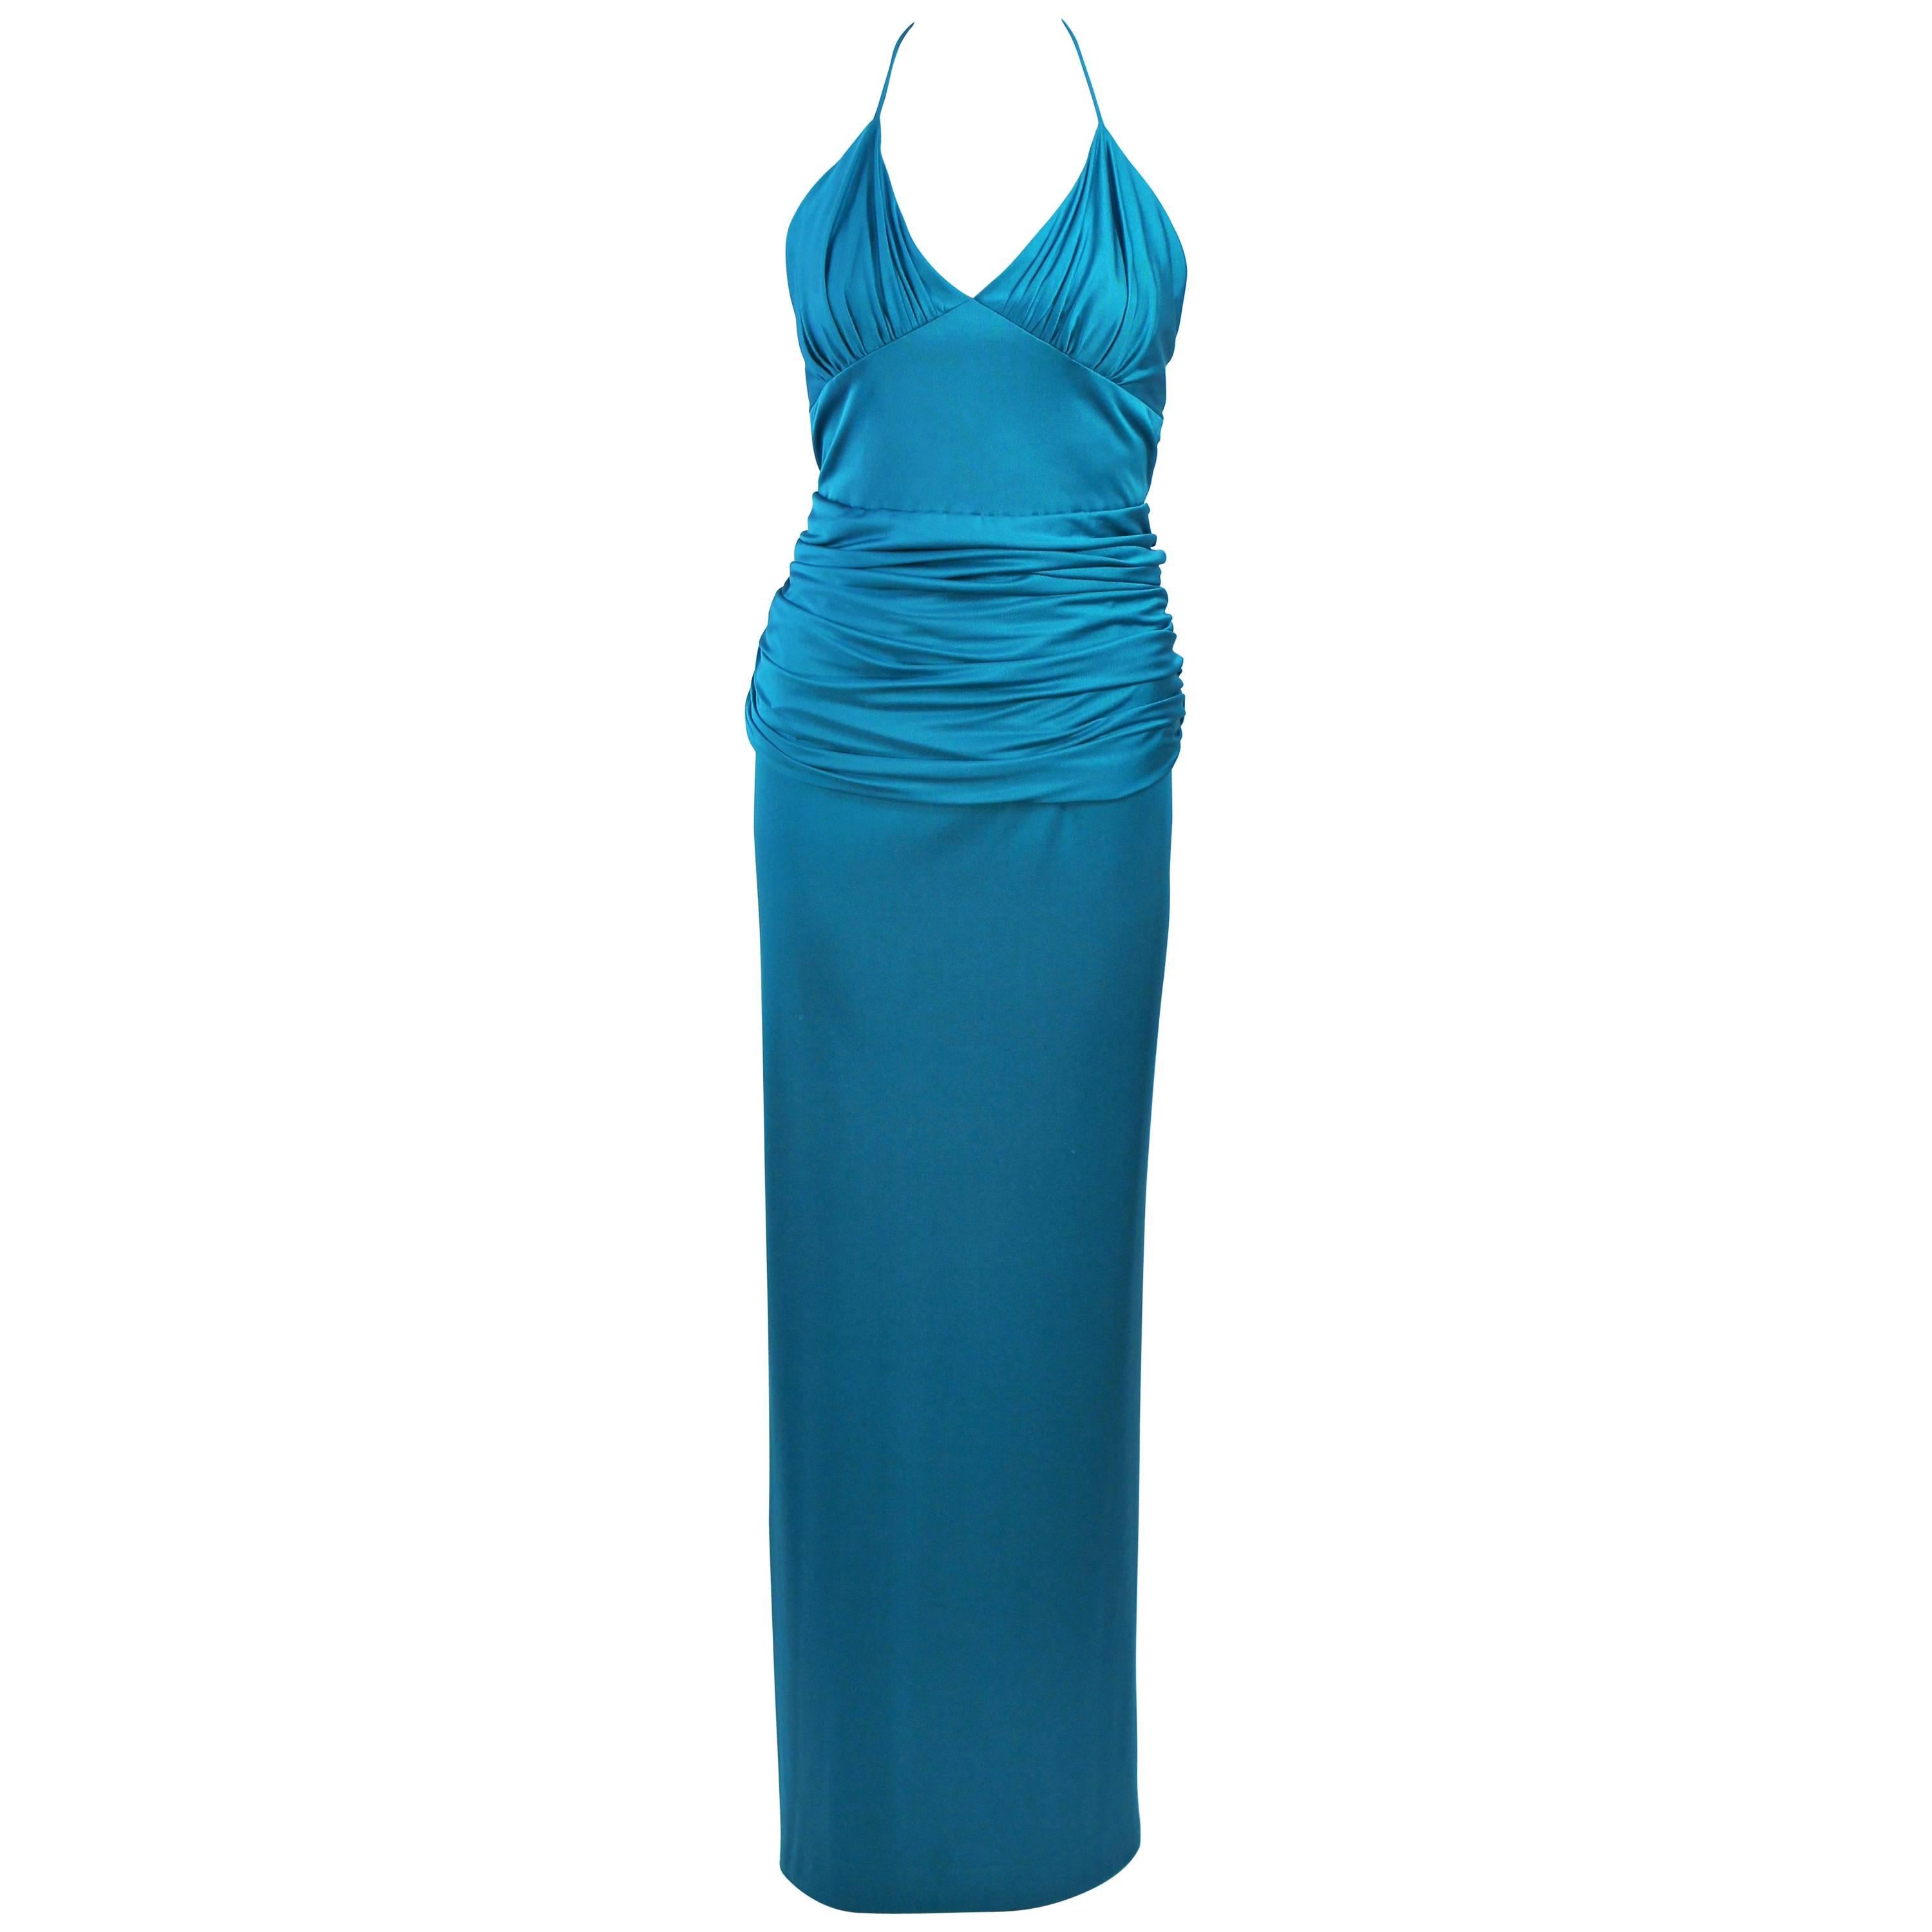 ELIZABETH MASON COUTURE Turquoise Silk Jersey Halter Gown Made to Order For Sale